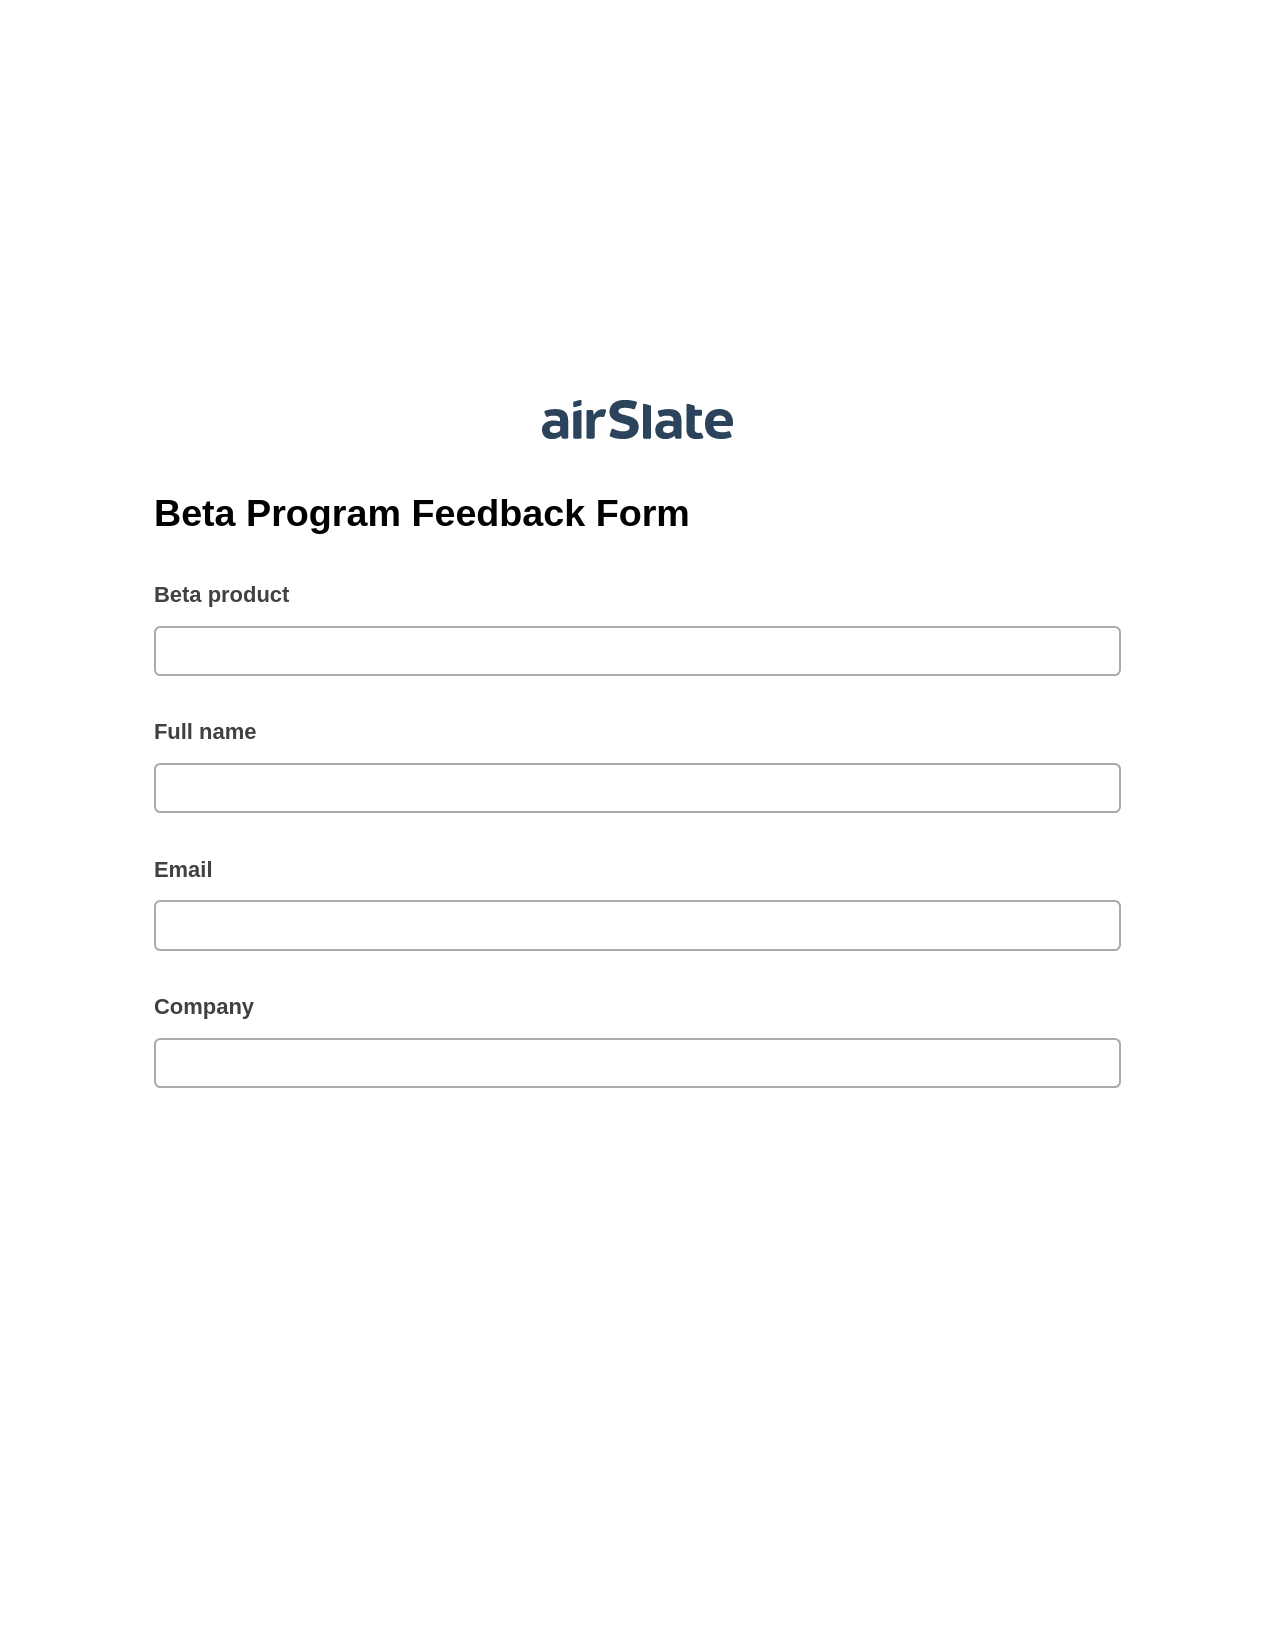 Multirole Beta Program Feedback Form Pre-fill from NetSuite Records Bot, Google Sheet Two-Way Binding Bot, Export to Formstack Documents Bot